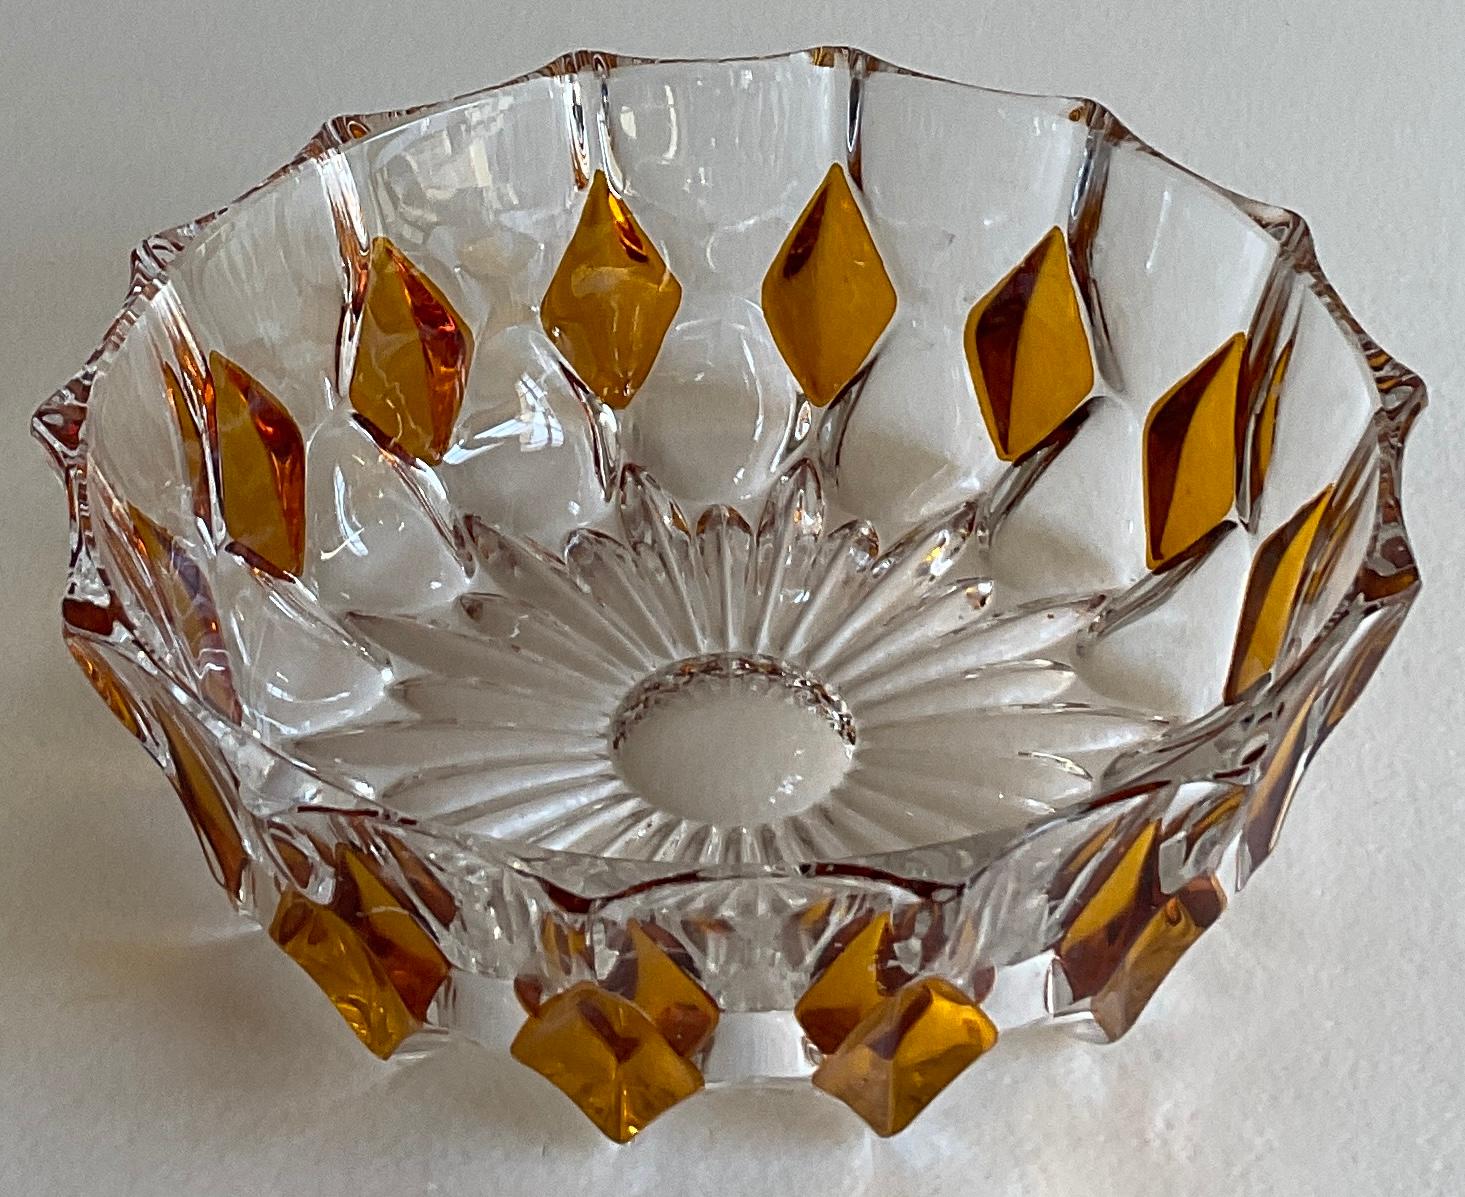 Lovely vintage French crystal candy dish or bowl. Decorated with amber hues giving a great contrast to the clear crystal.

Use this bowl for anything from candies to candles.

Measures: 6 1/8